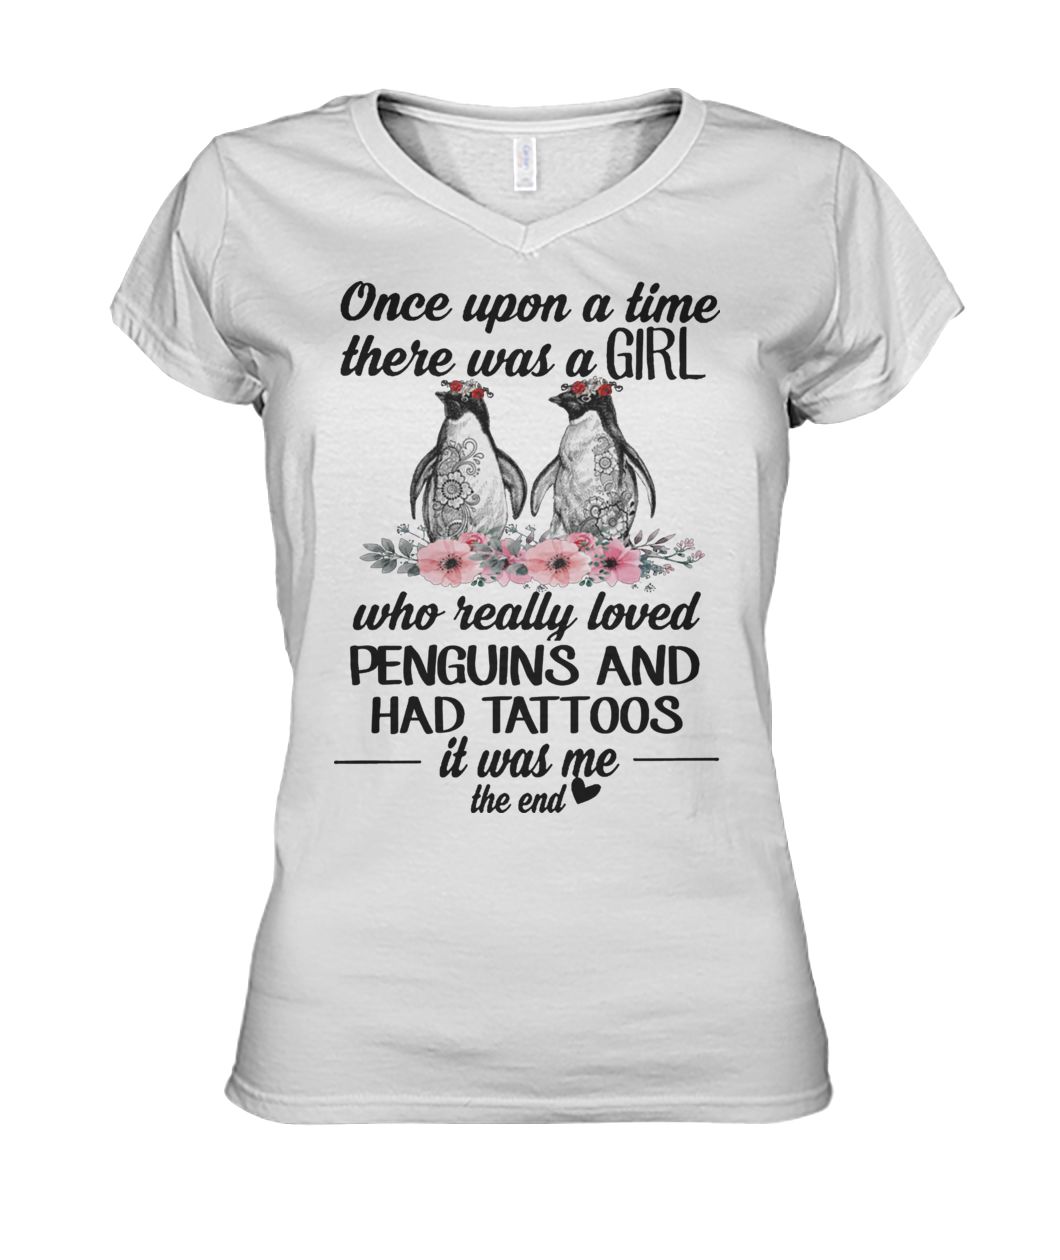 Once upon a time there was a girl who really loved penguins and had tattoos it was me the end women's v-neck